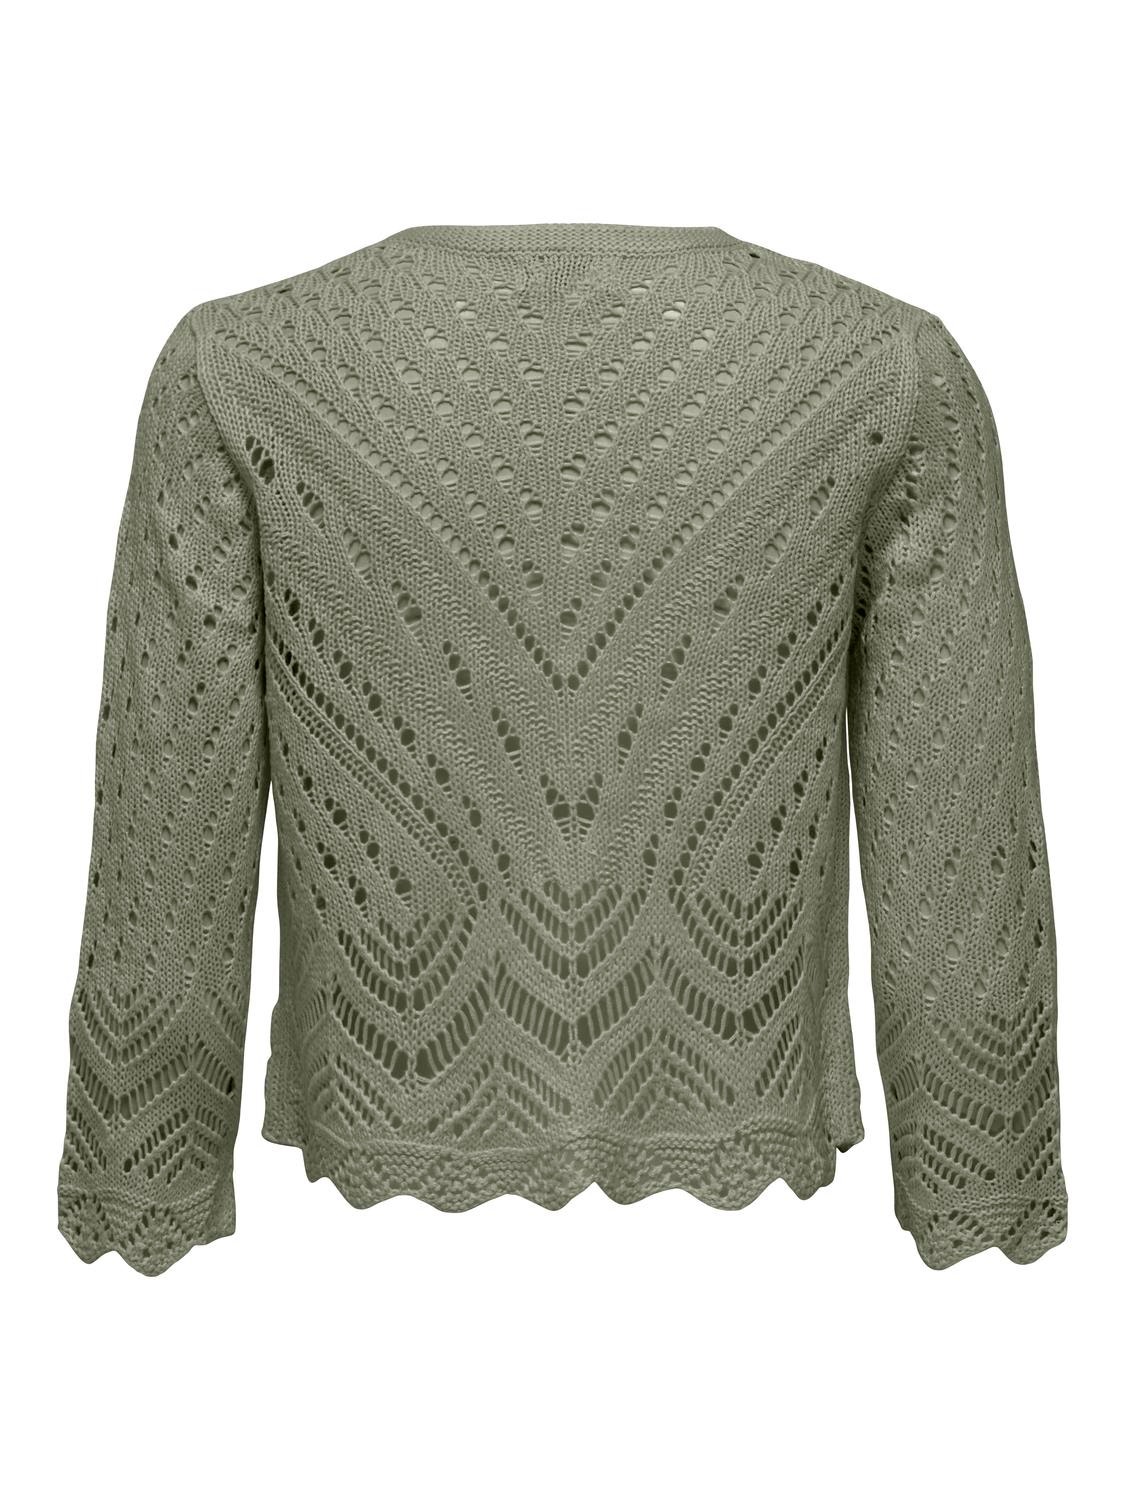 ONLY Cropped Cardigan -Deep Lichen Green - 15184486